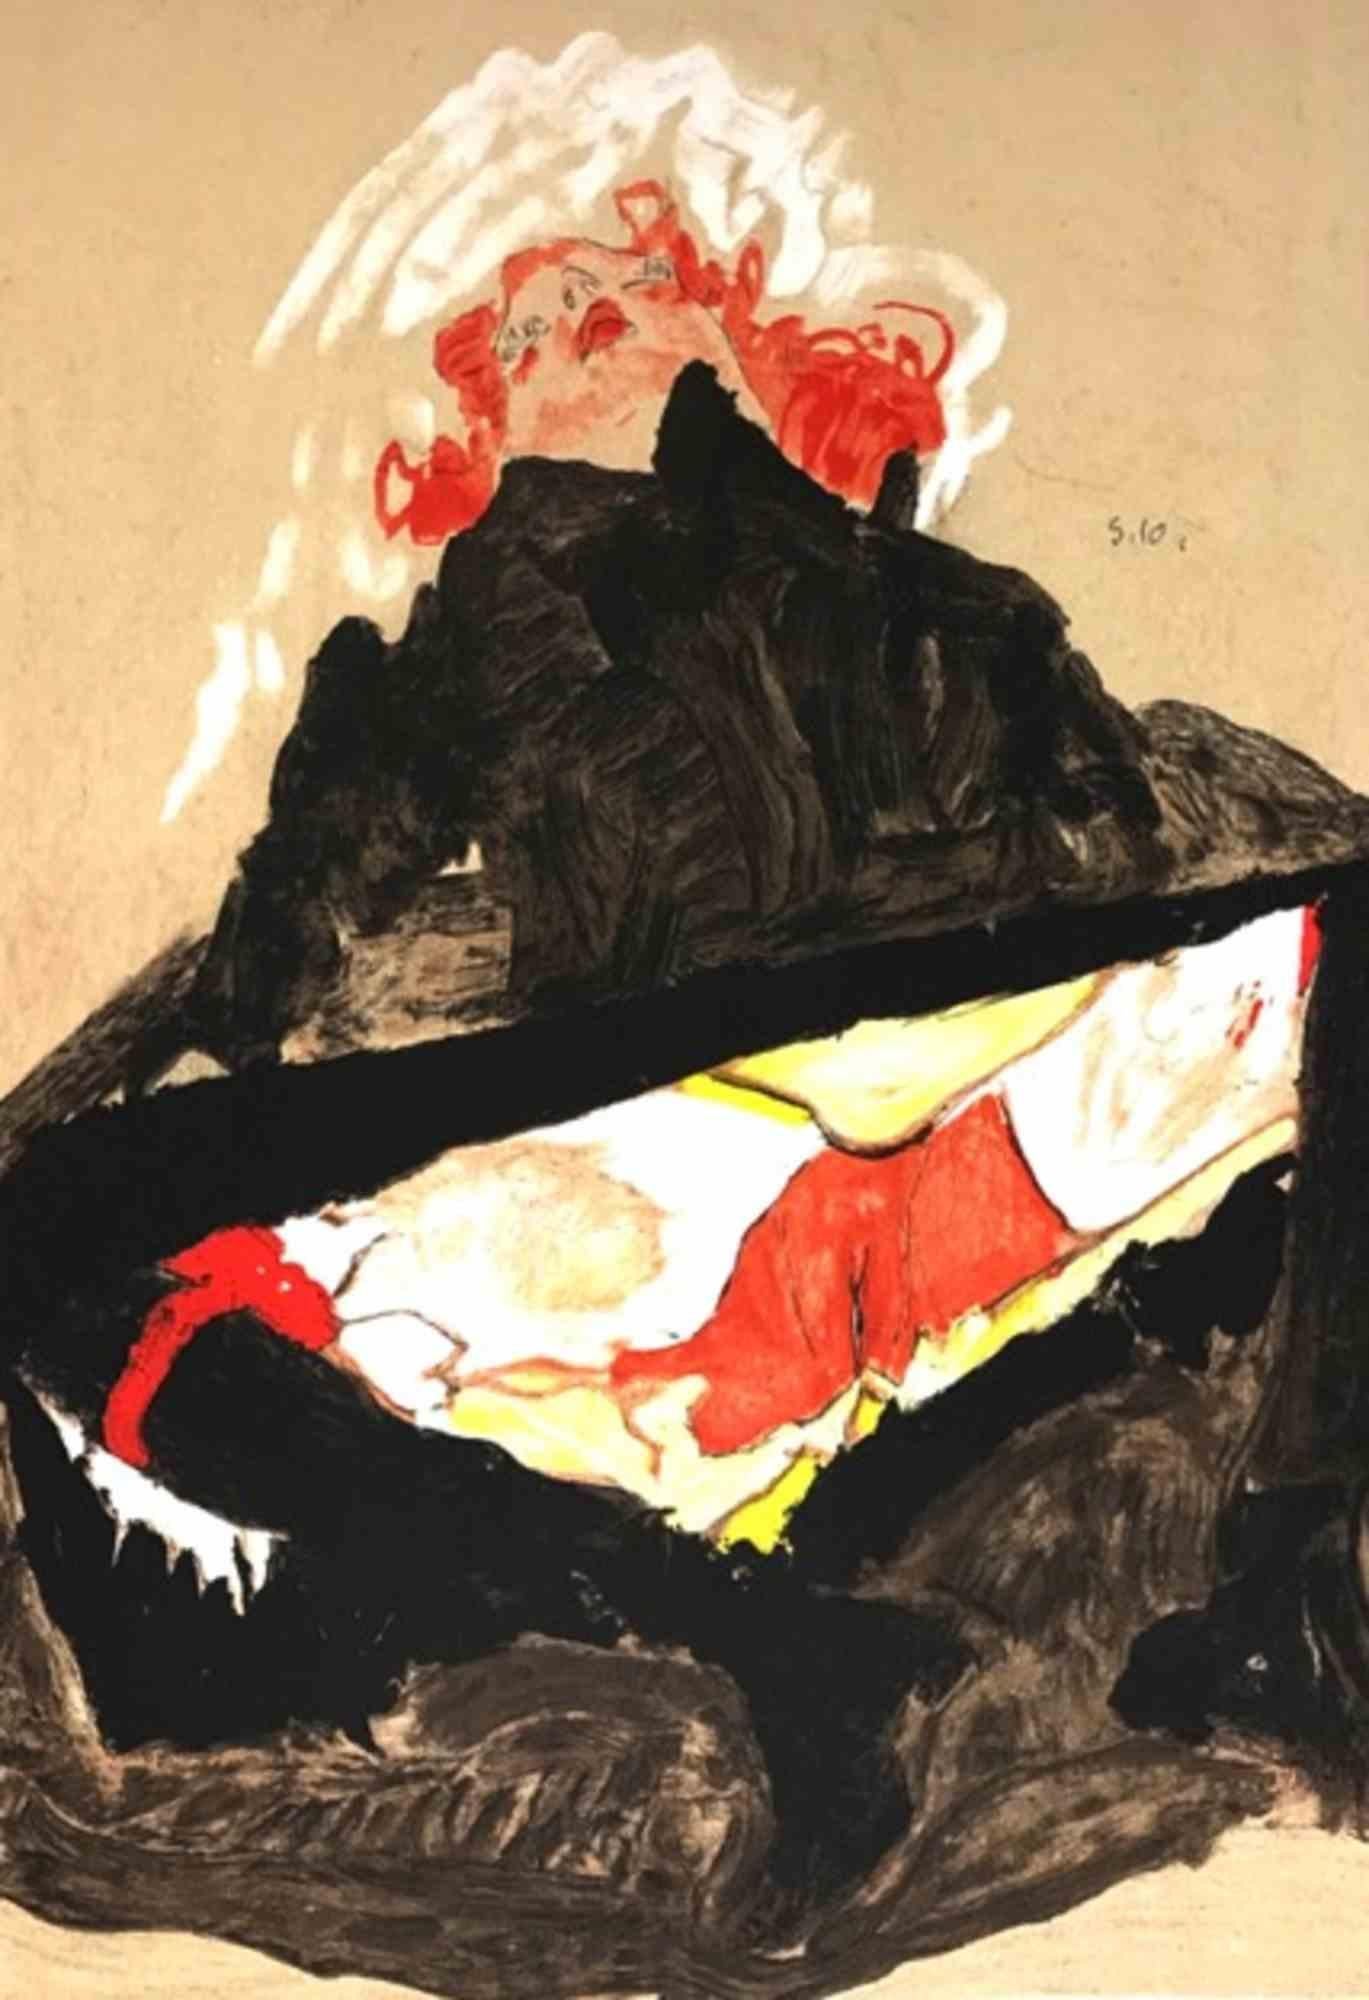 Egon Schiele Portrait Print - Woman with Red Hair - Lithograph - 2007